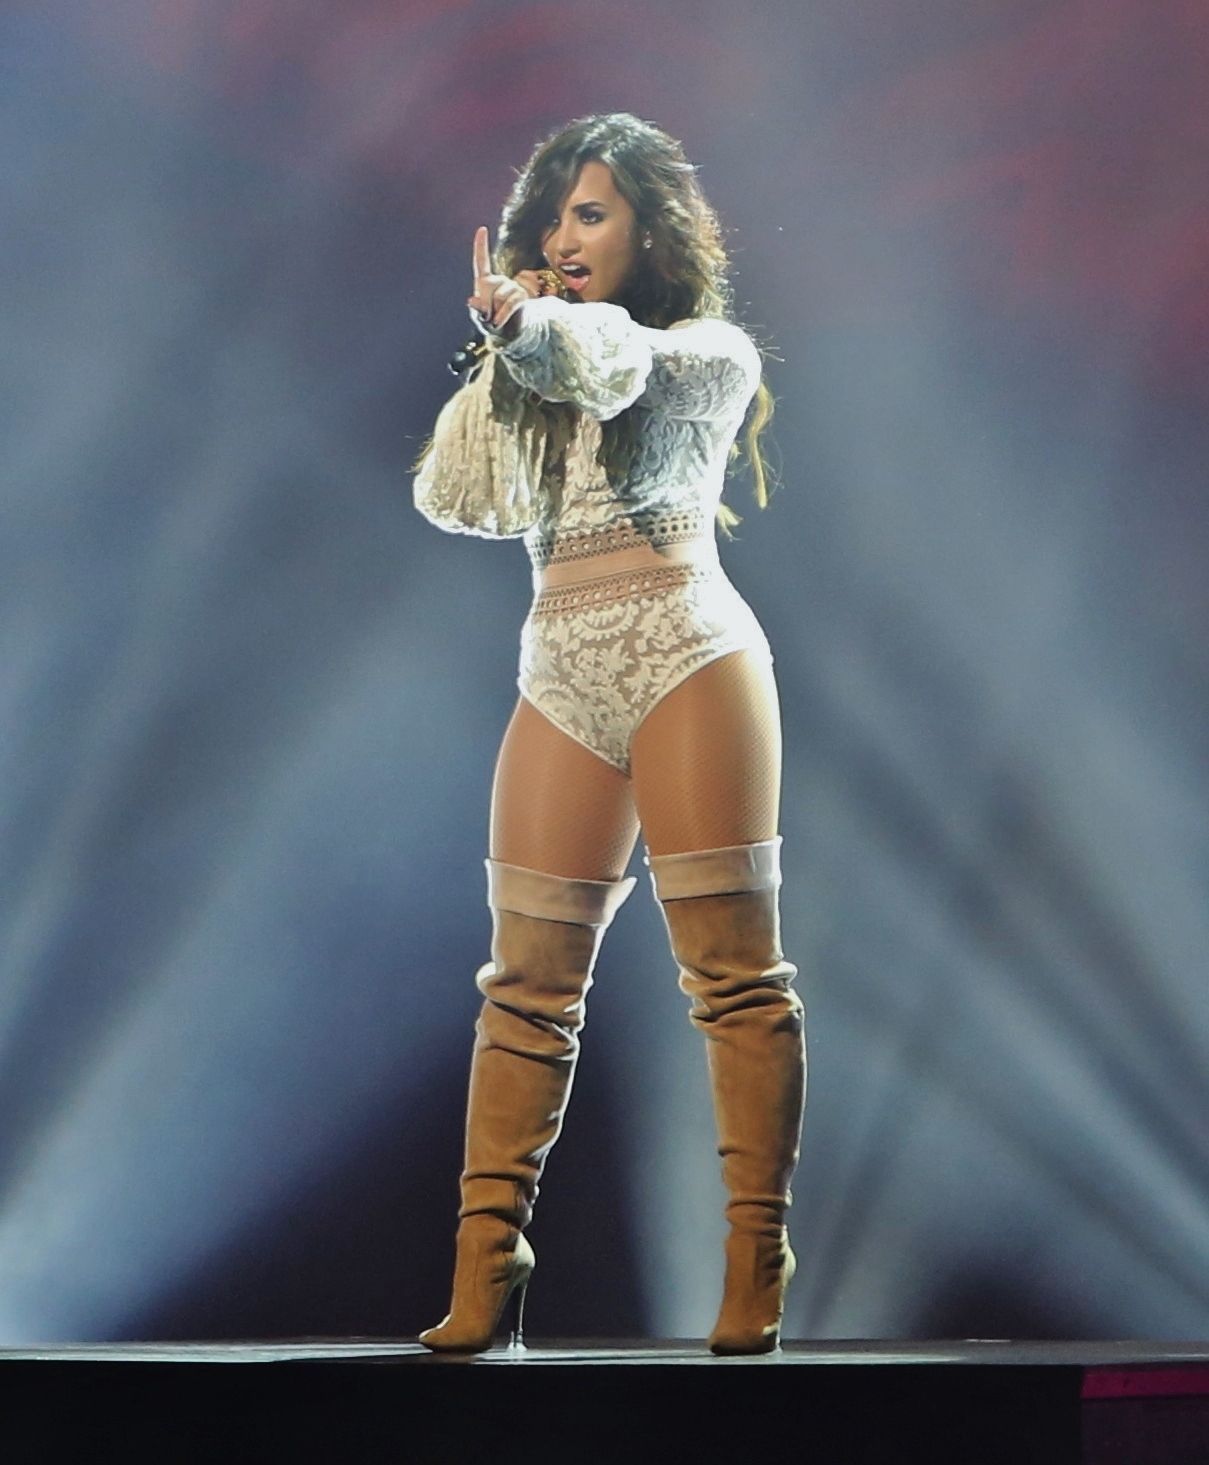 Demi Lovato hot performing in Vancouver 20x HQ photos 5.jpg